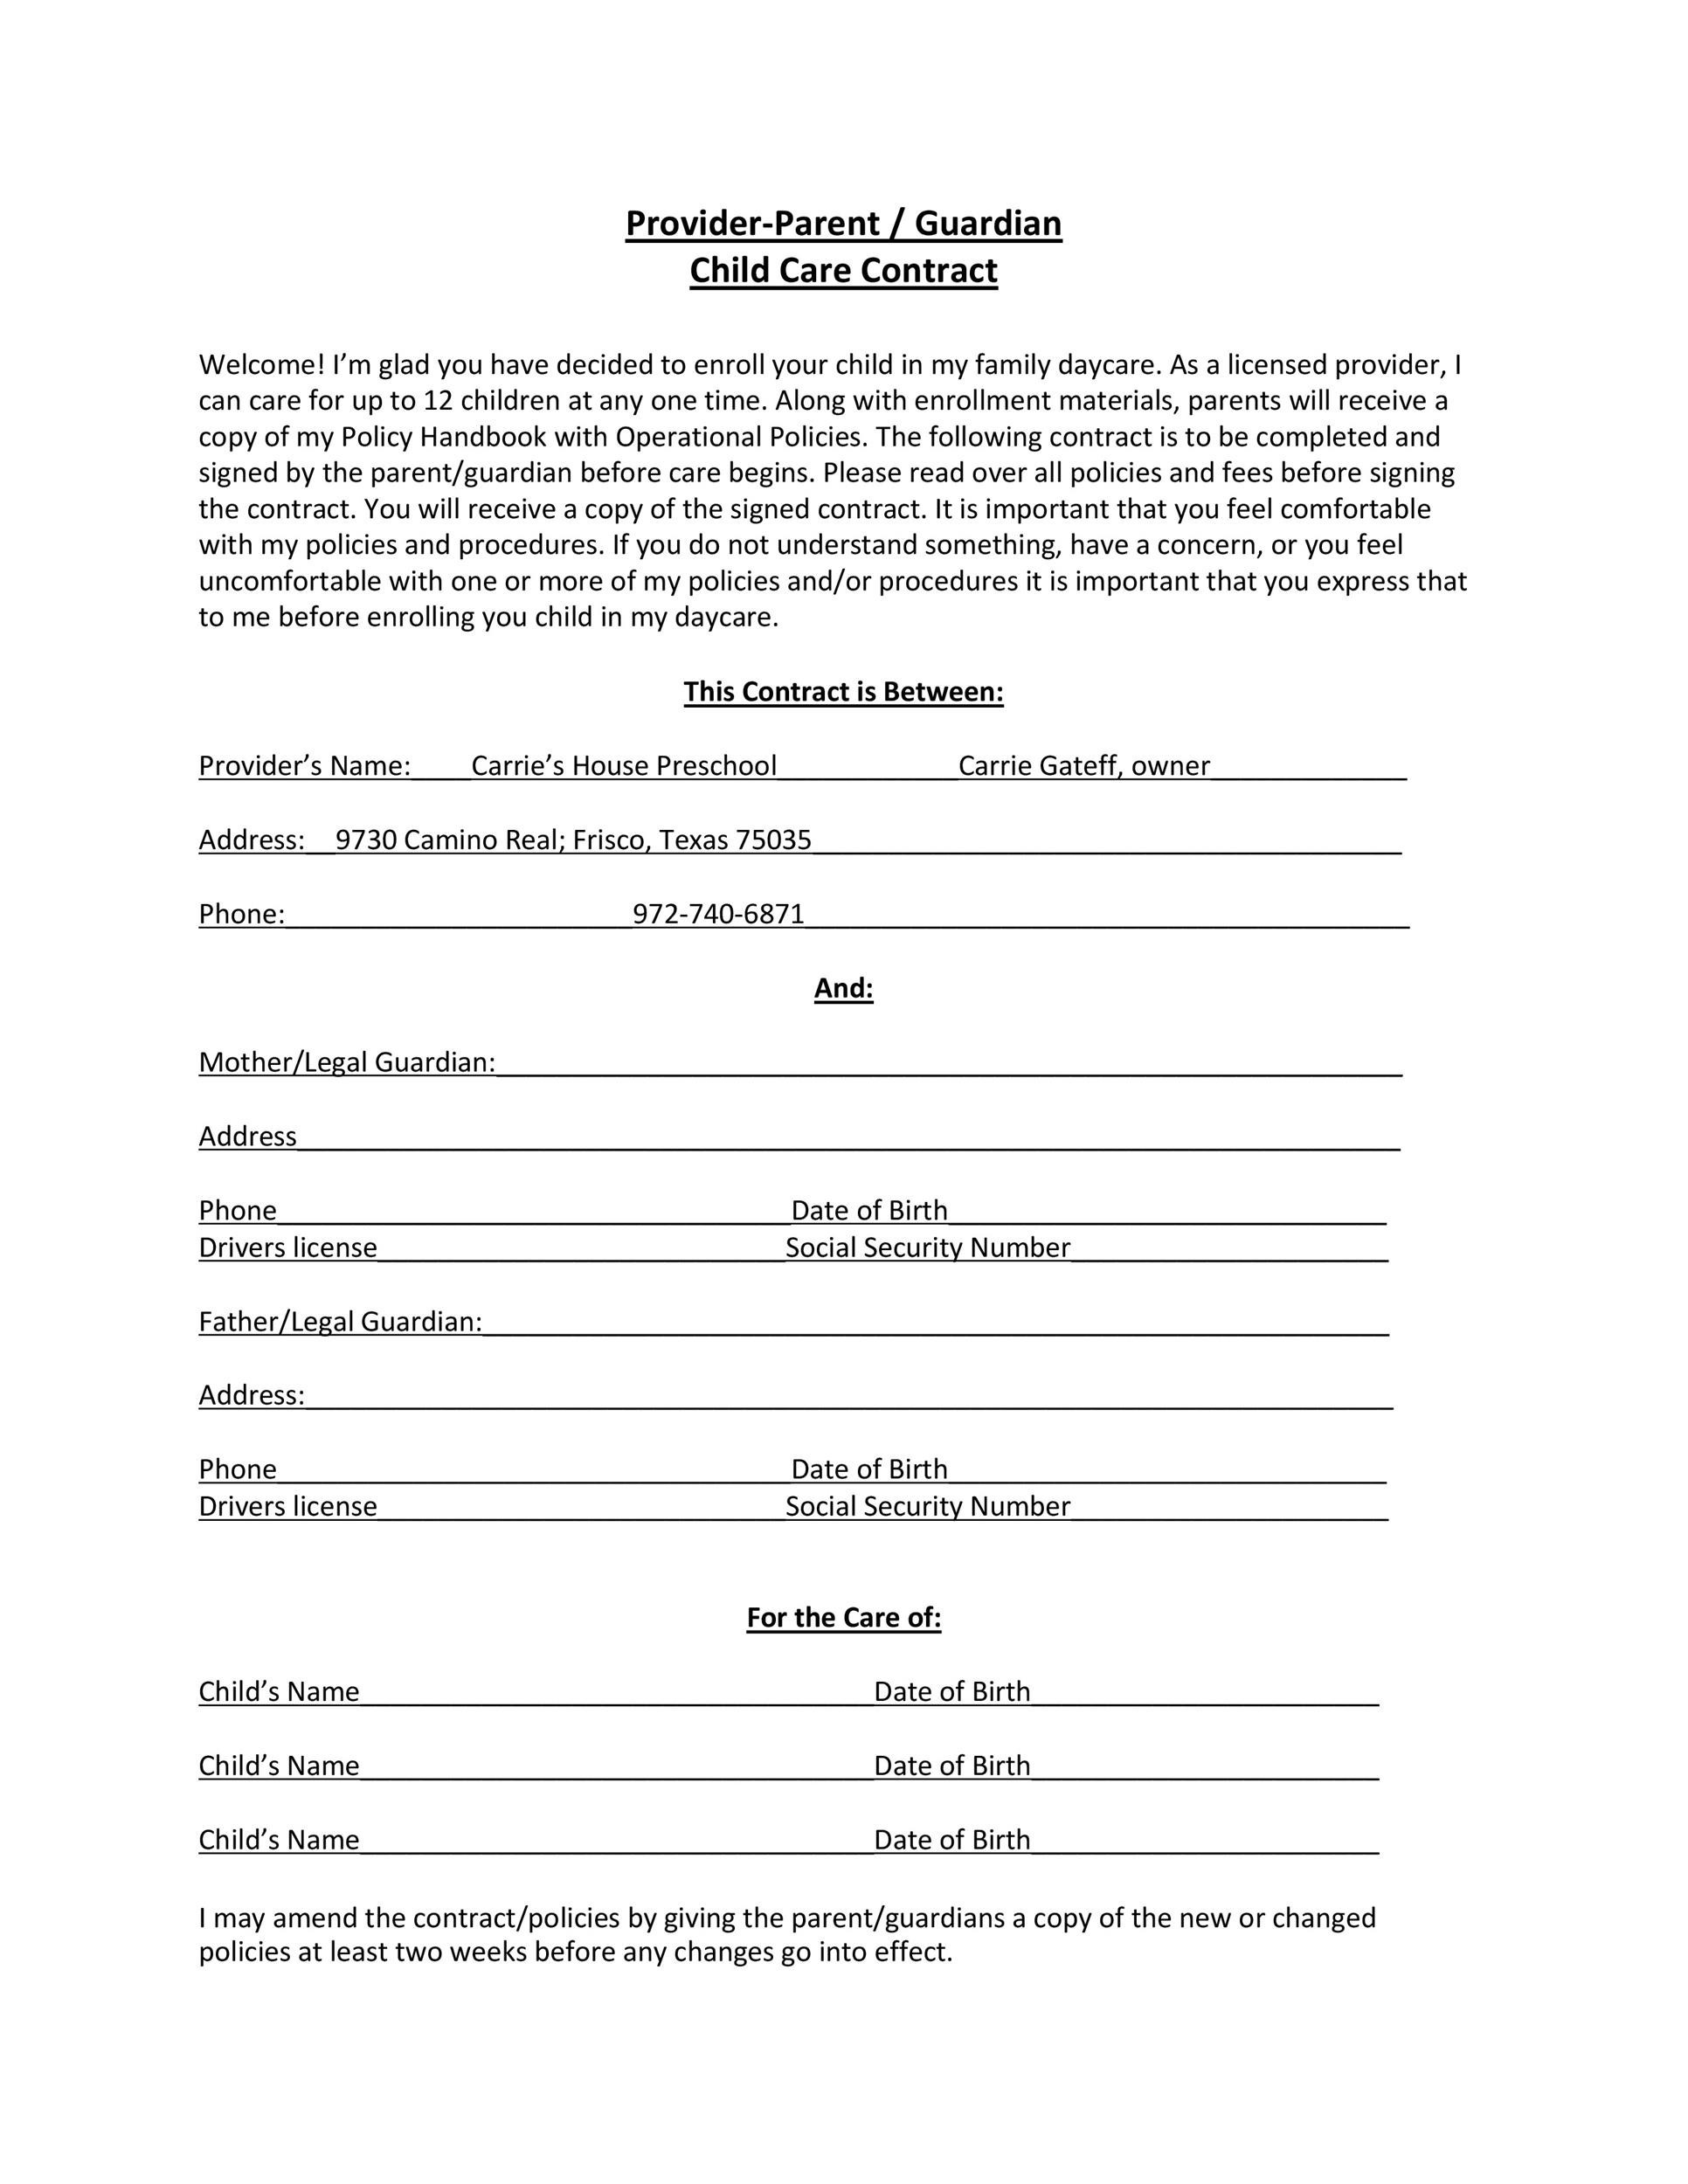 50 Daycare, Child Care & Babysitting Contract Templates [Free] ᐅ